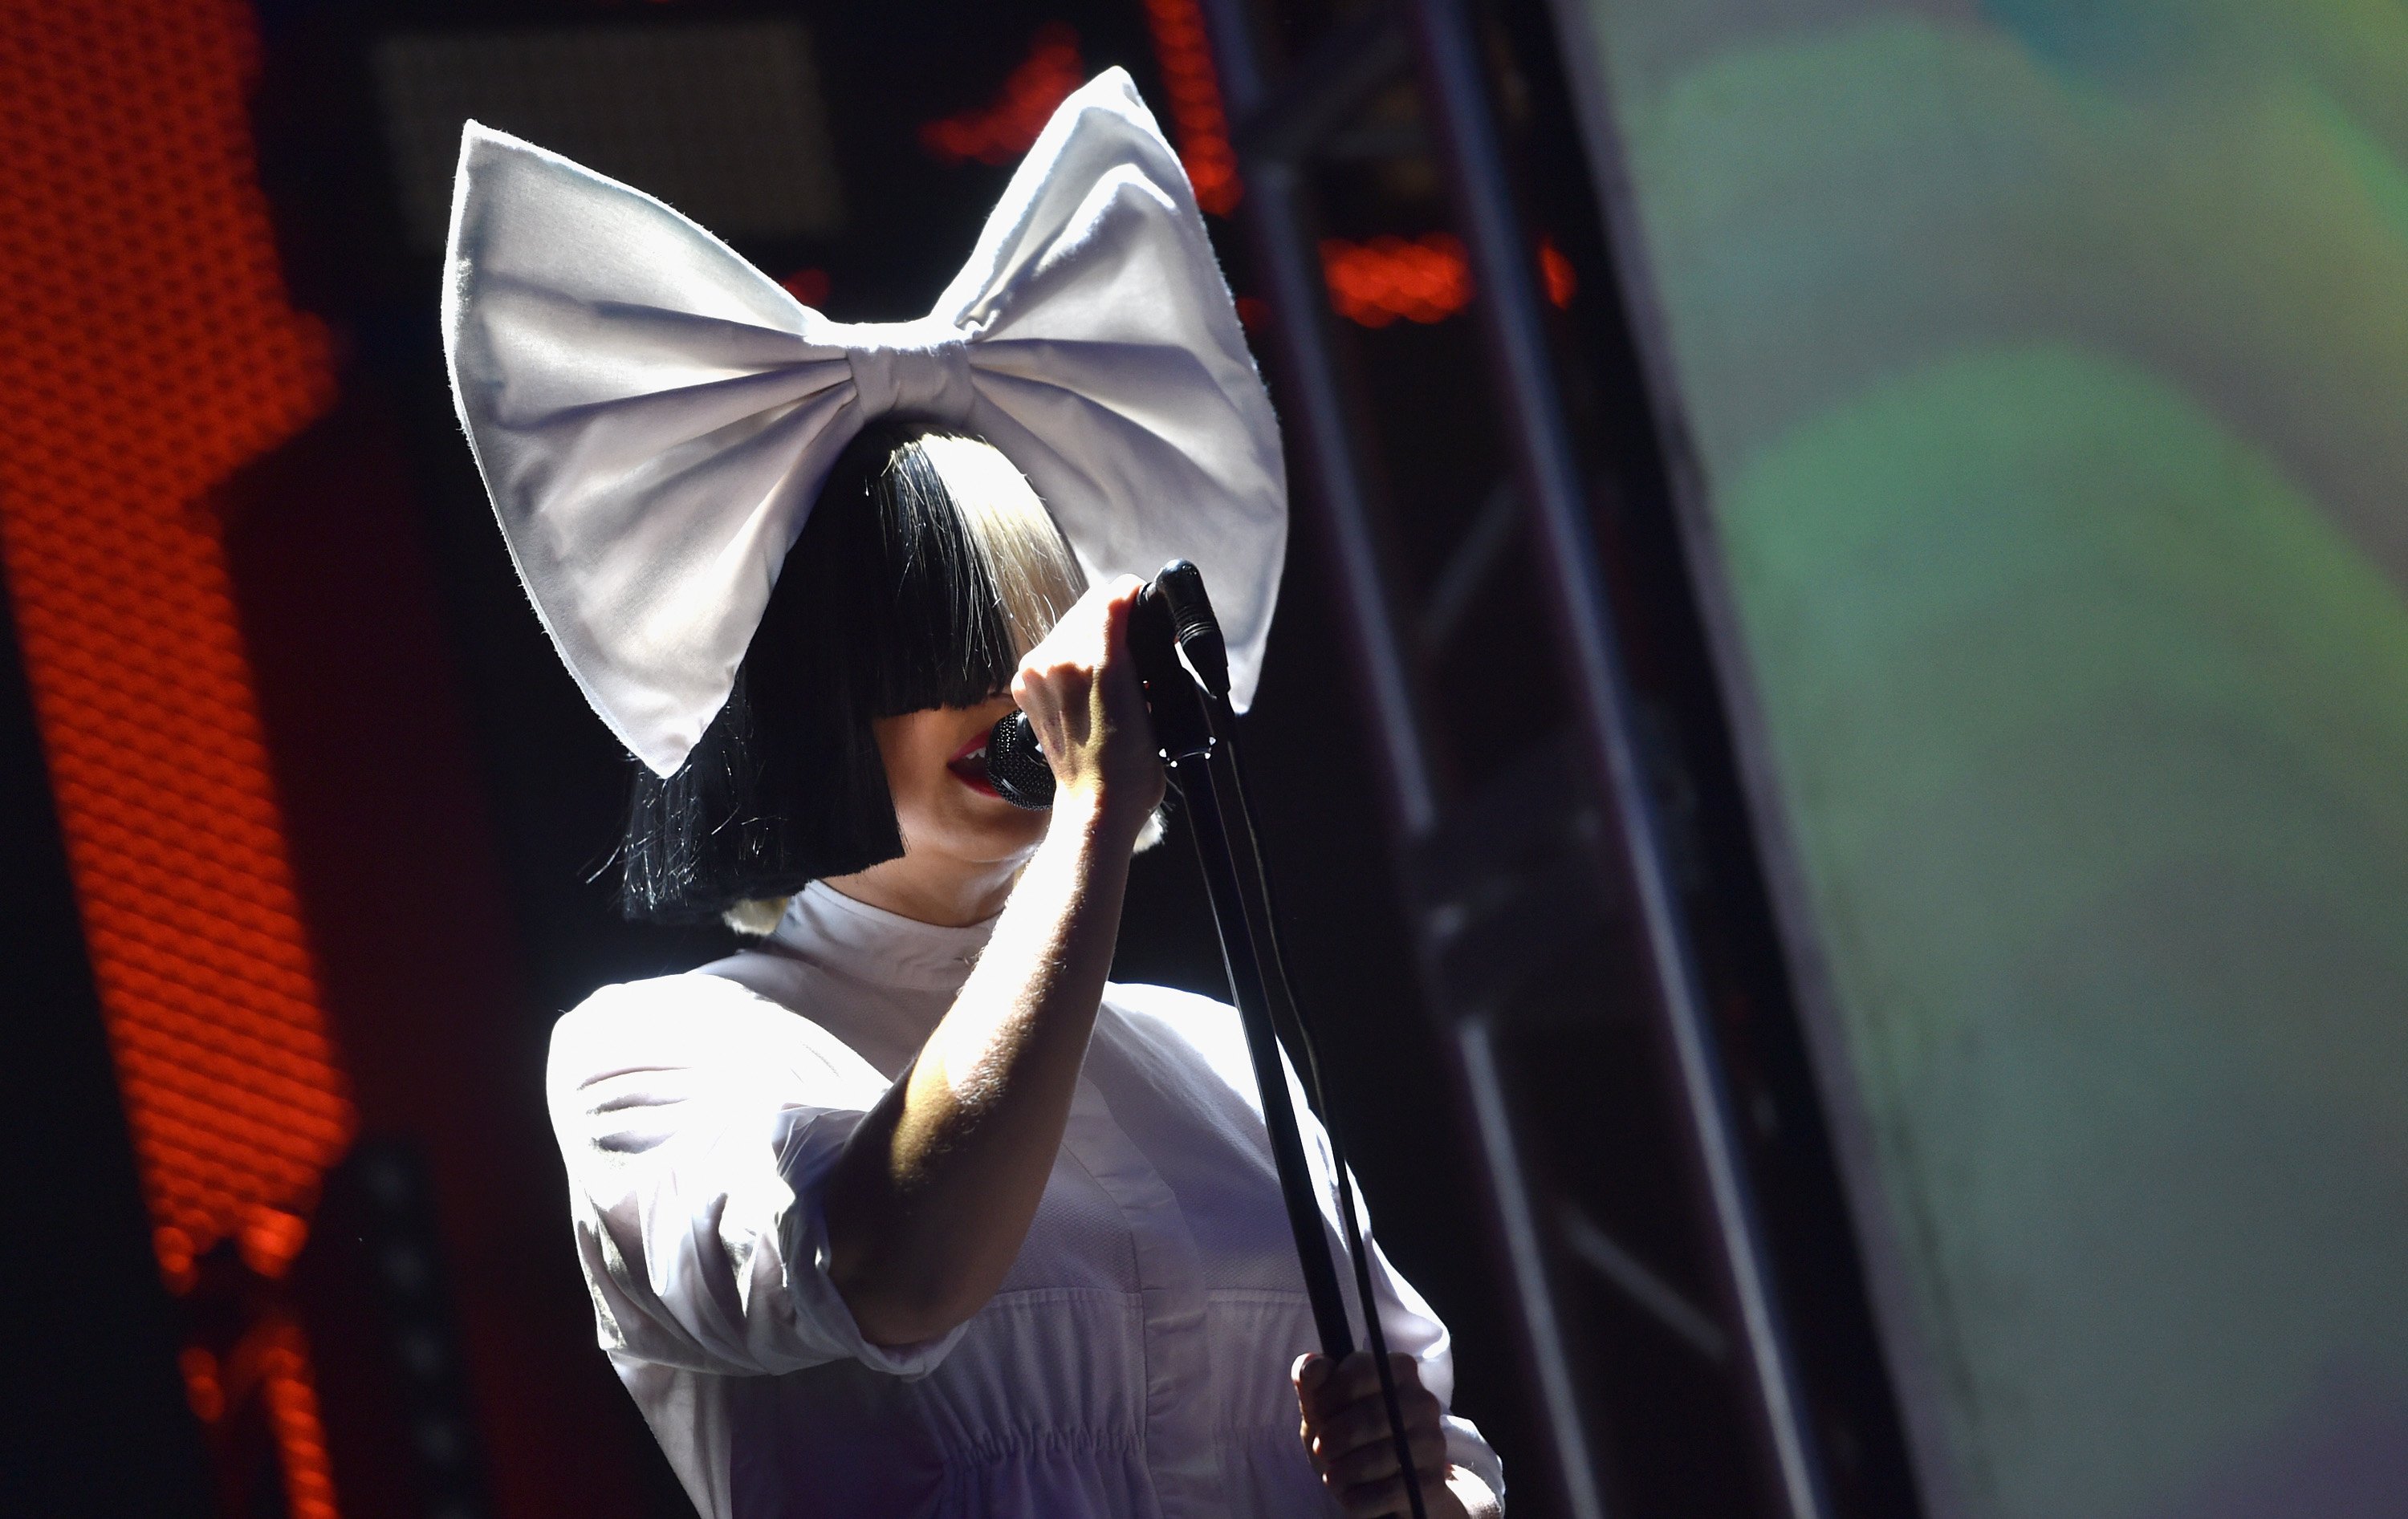  Sia performs onstage at the 2016 iHeartRadio Music Festival at T-Mobile Arena on September 23, 2016. | Photo: Getty Images